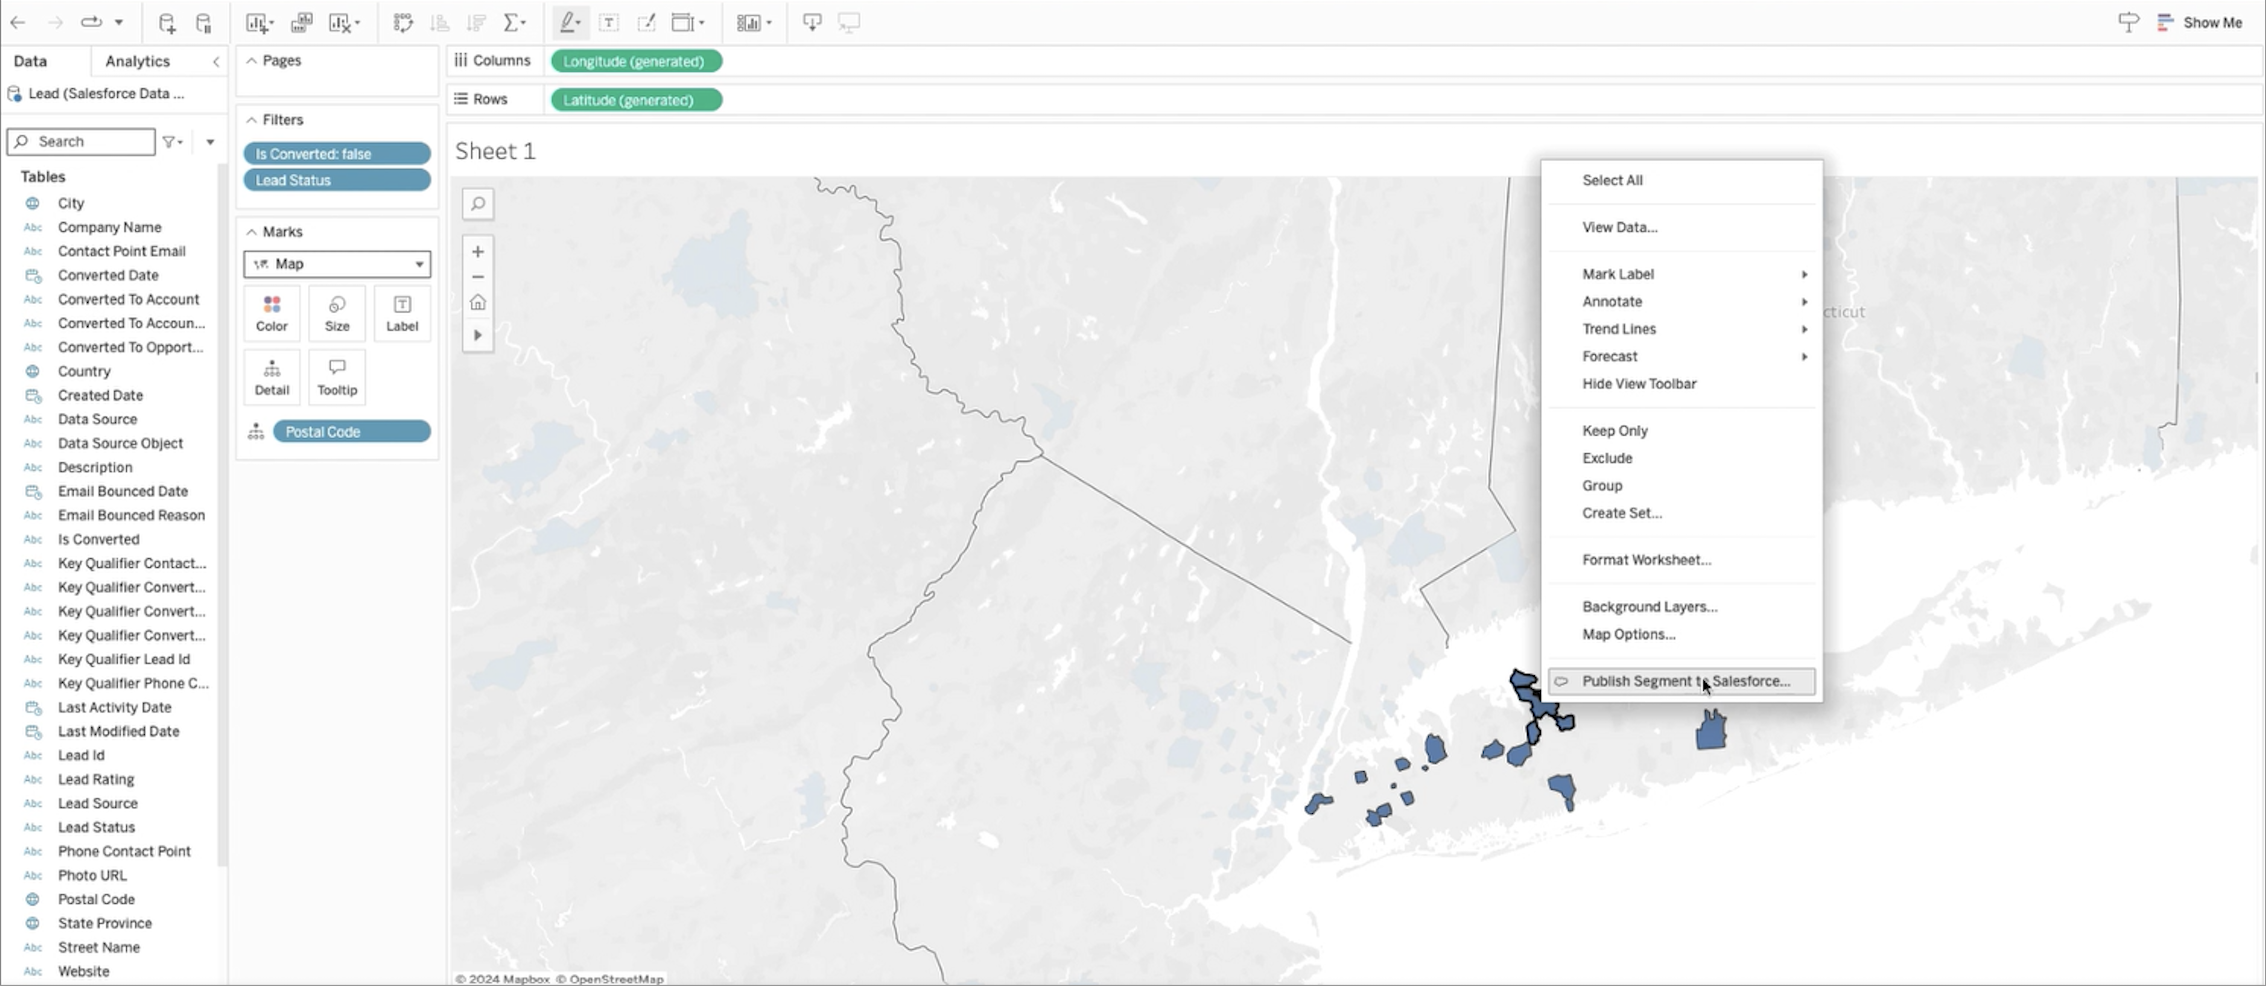 A map of New York within the Tableau Cloud interface shows a segment of customers selected, and the menu option "Publish Segment in Salesforce" being selected, which will create a segment within Data Cloud